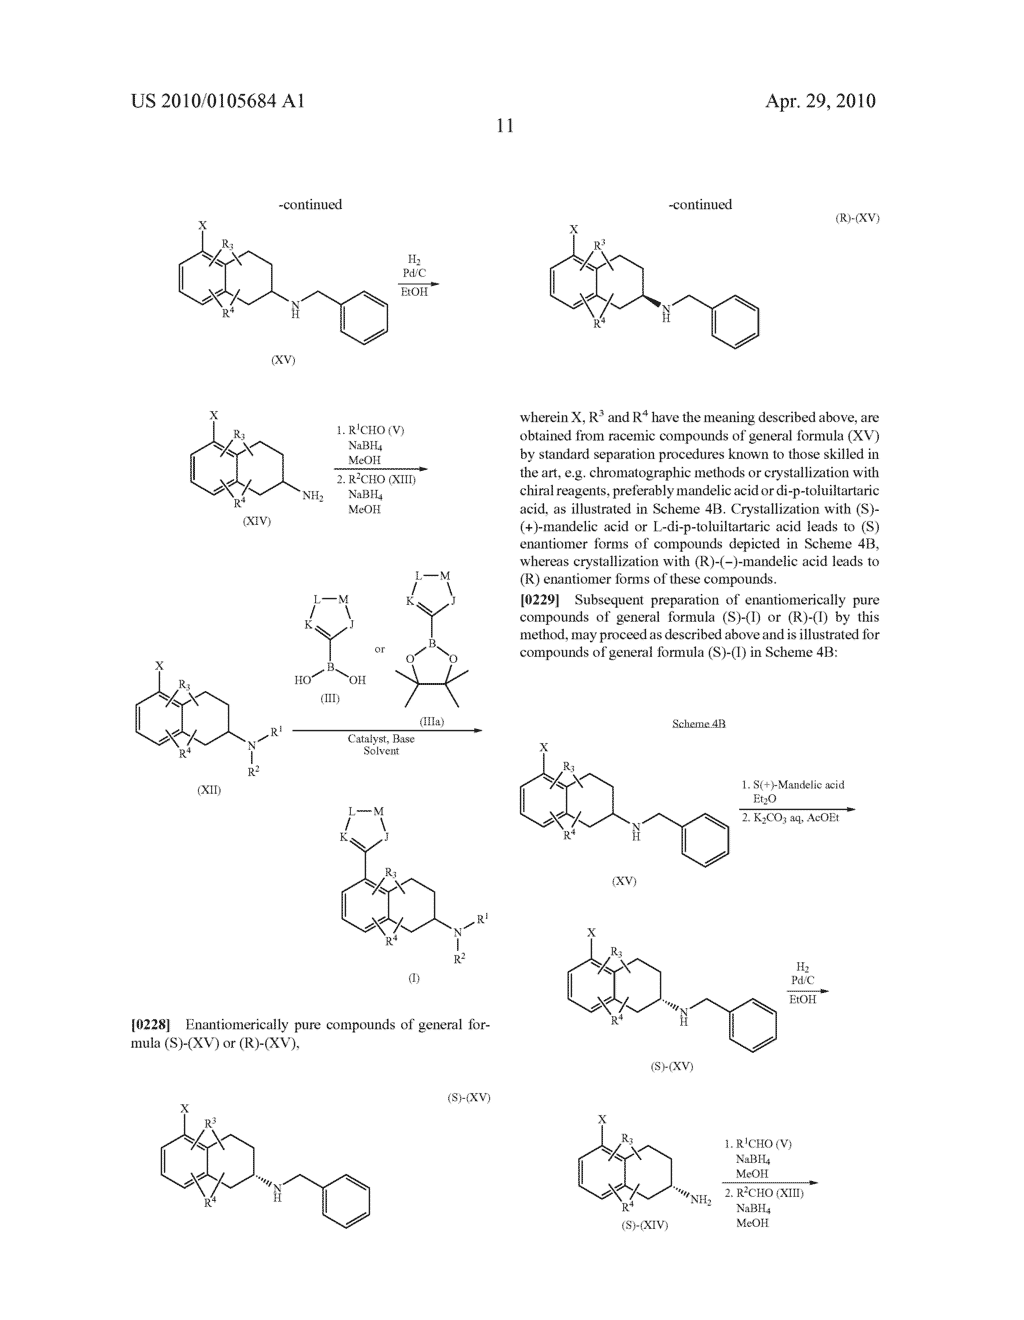 HETEROCYCLYL-SUBSTITUTED-TETRAHYDRO-NAPHTHALEN-AMINE DERIVATIVES, THEIR PREPARATION AND USE AS MEDICAMENTS - diagram, schematic, and image 12